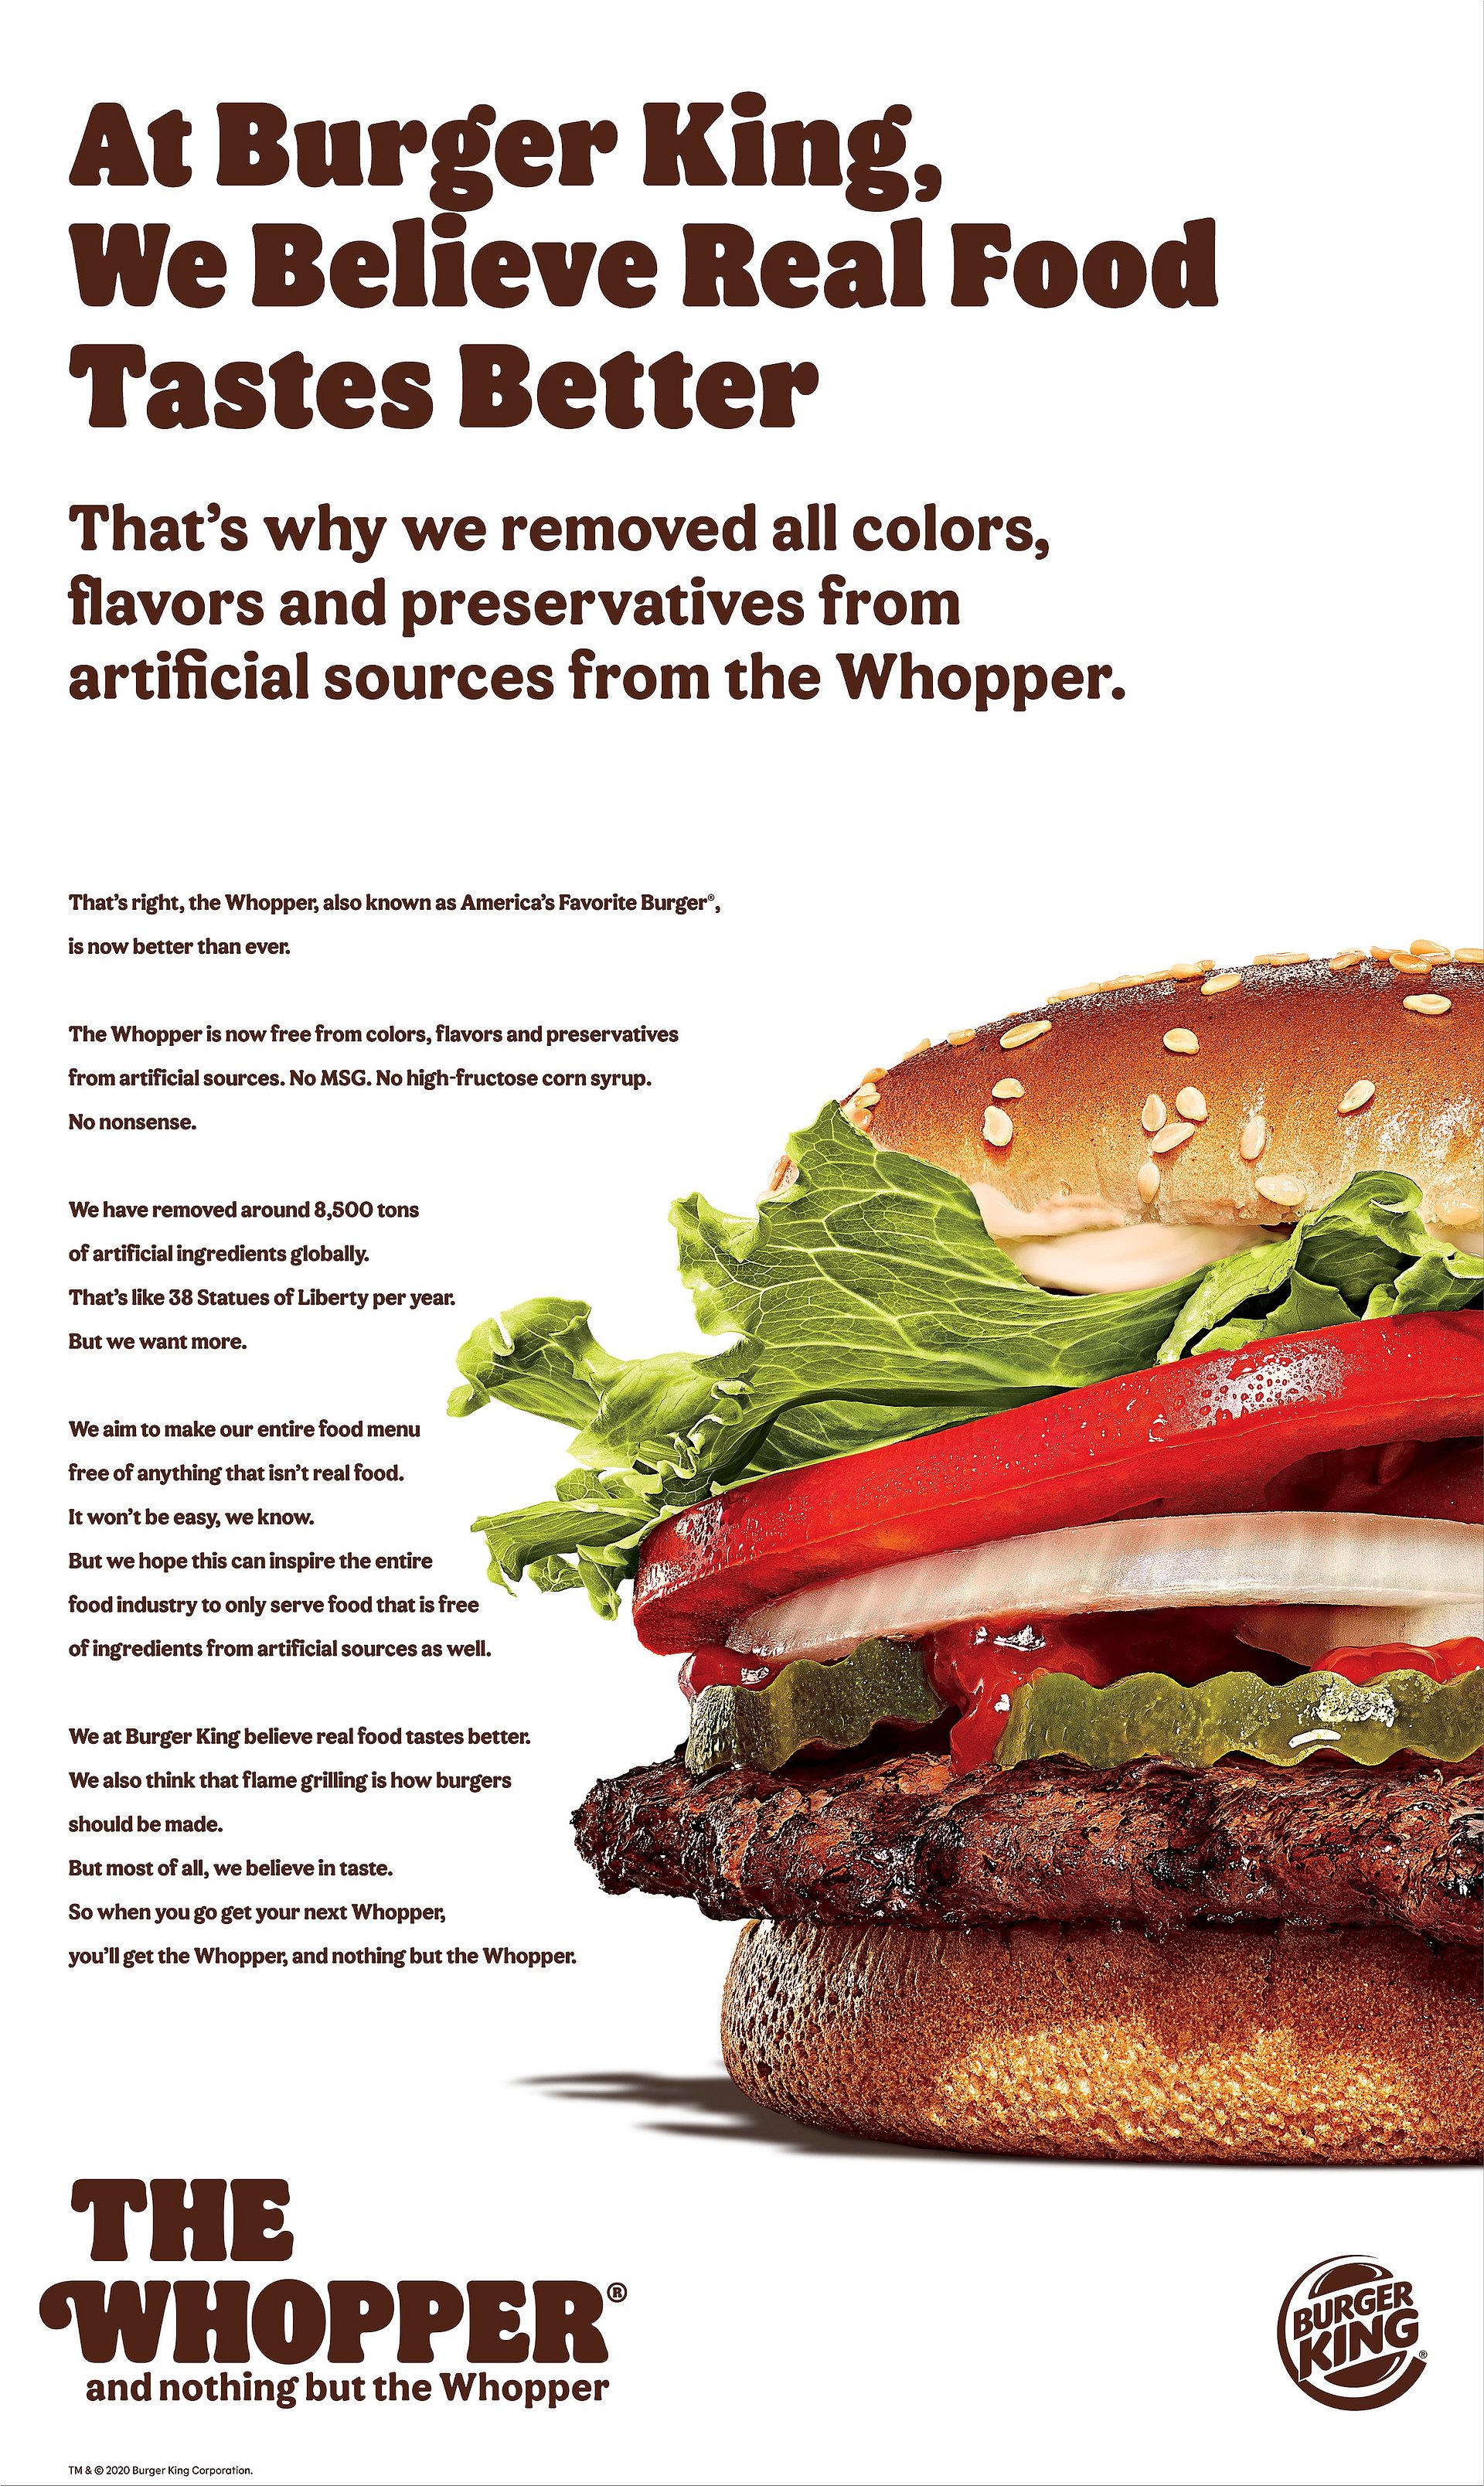 https://cdn.adruby.com/sites/default/files/image-ads/Burger-King-Whopper-and-nothing-but-the-Whopper-ads-s01.jpg